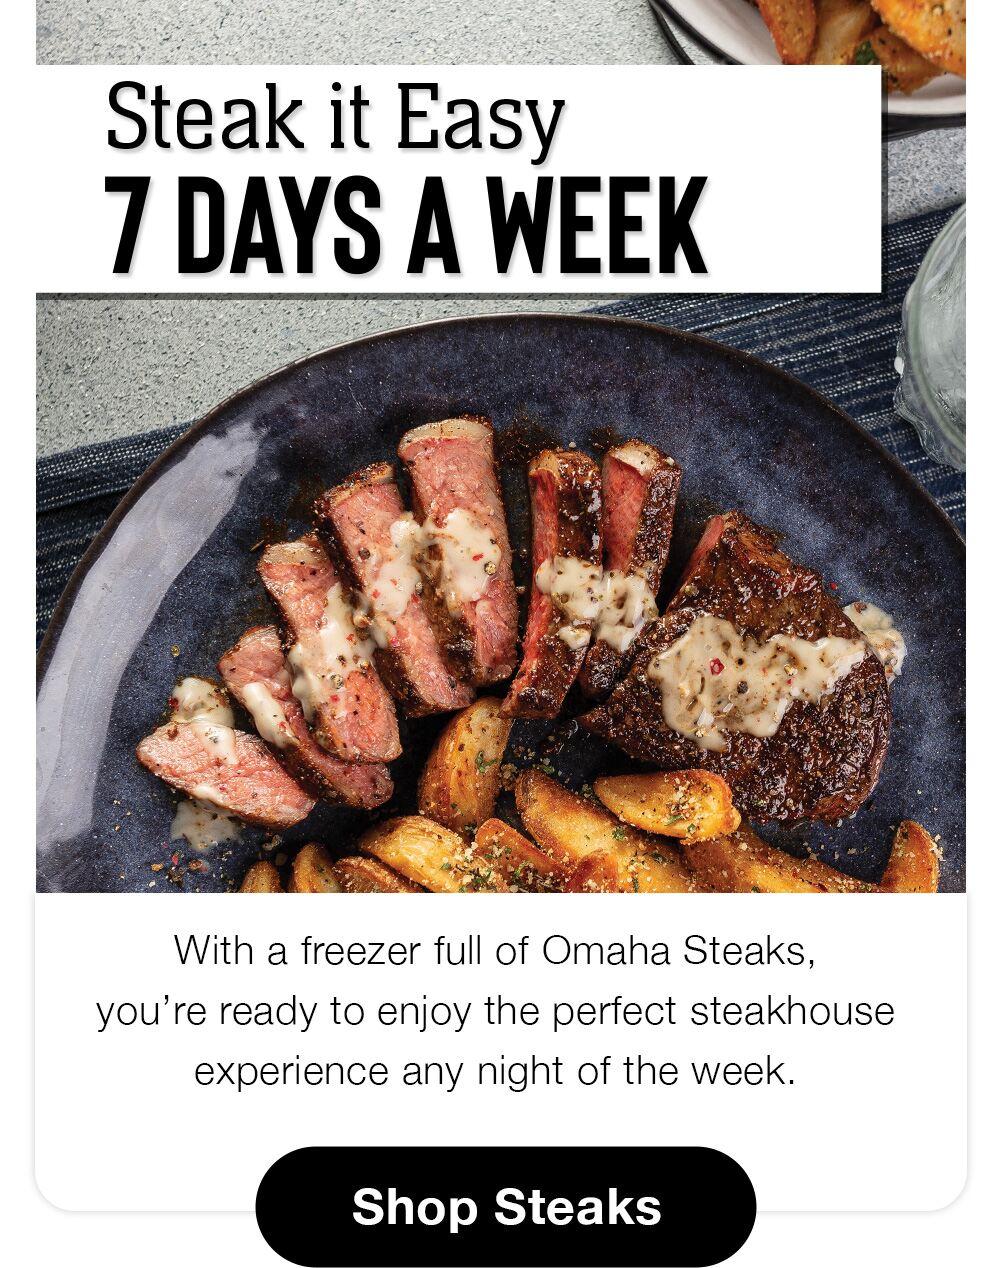 Steak it Easy 7 DAYS A WEEK | With a freezer full of Omaha Steaks, you're ready to enjoy the perfect steakhouse experience any night of the week. || Shop Steaks